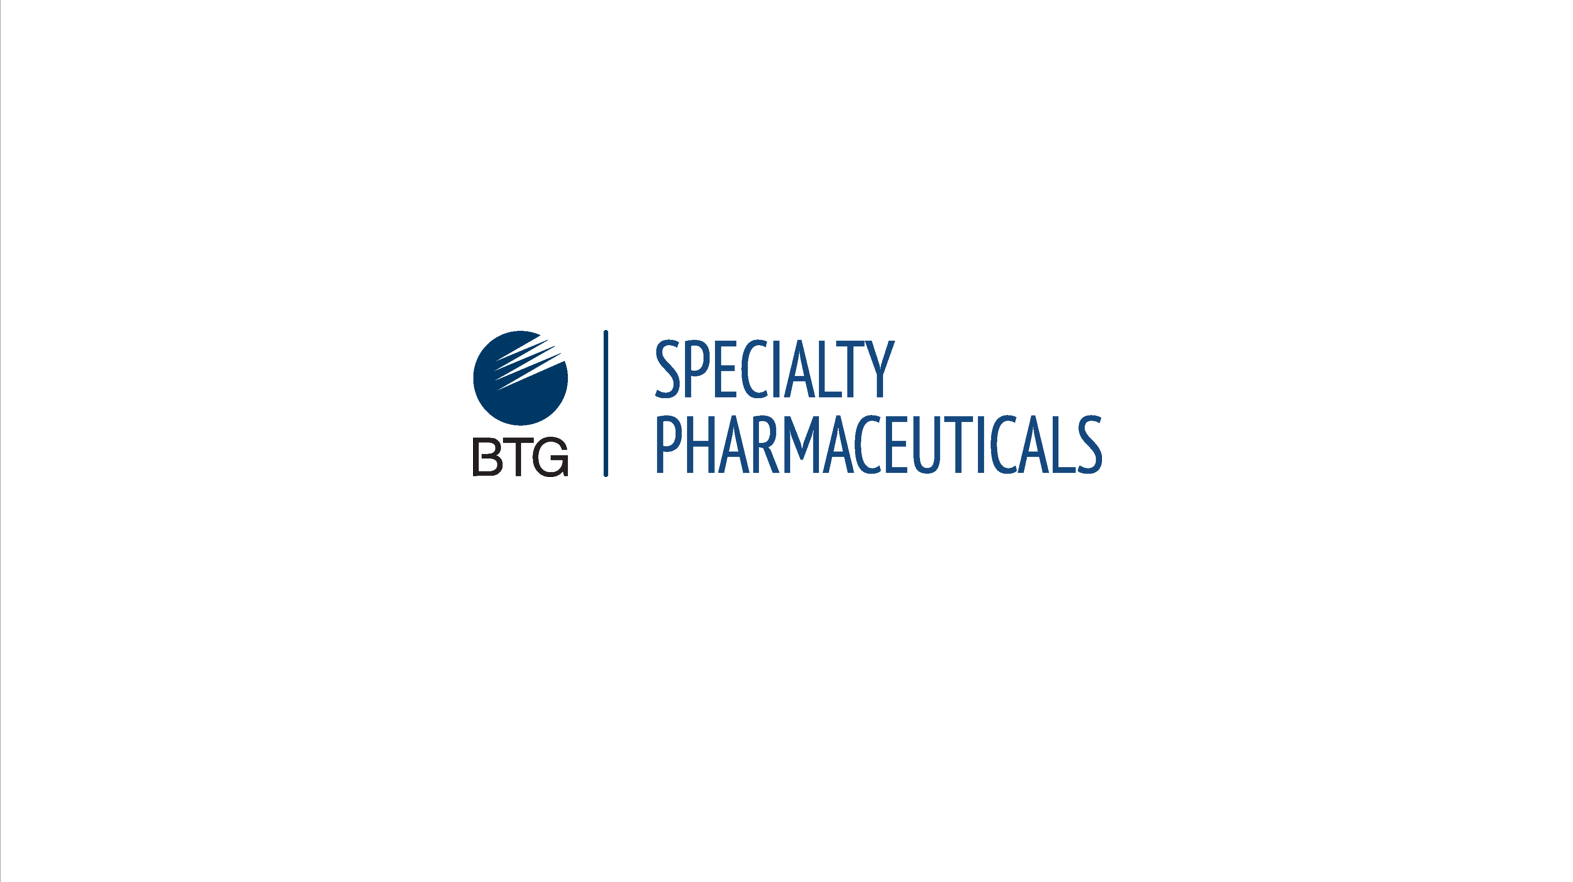 Charterhouse Capital Partners-backed SERB to acquire BTG Specialty Pharmaceuticals Module Image